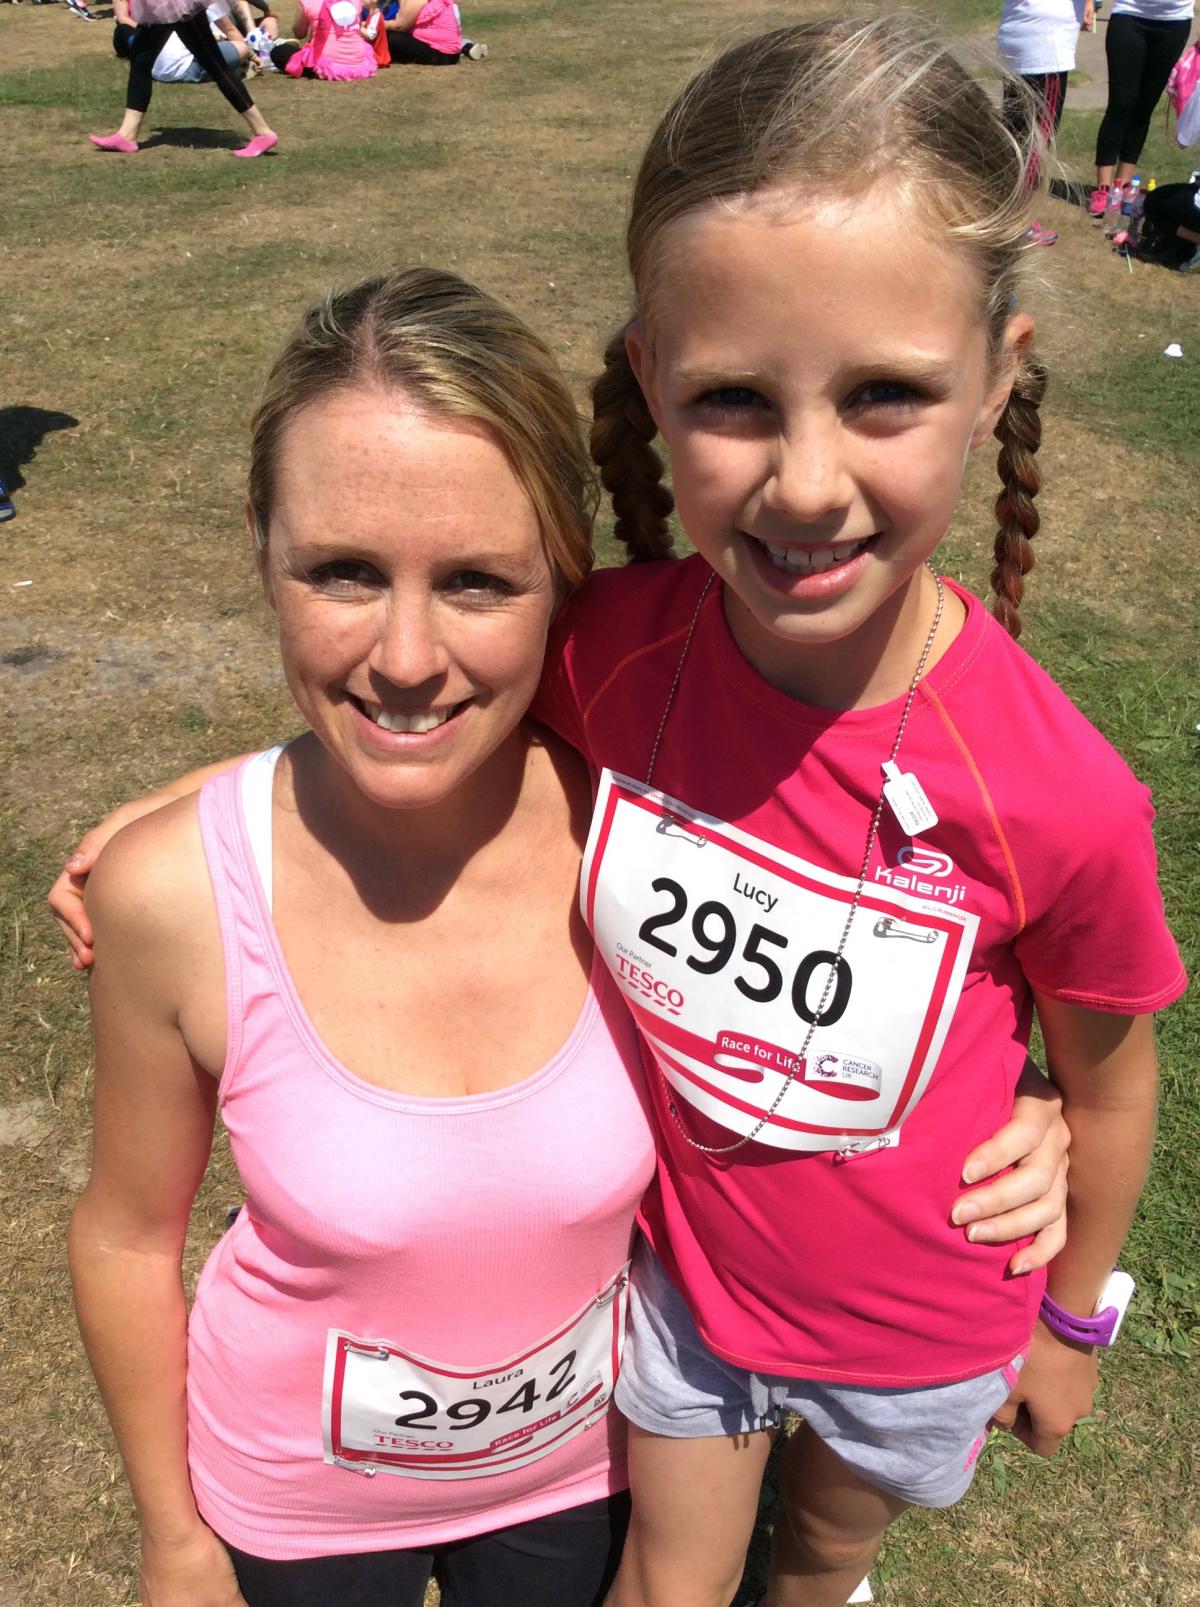 Lucy Phillips, 8, from Shirley, who came second in the 5k with her proud mum Laura.